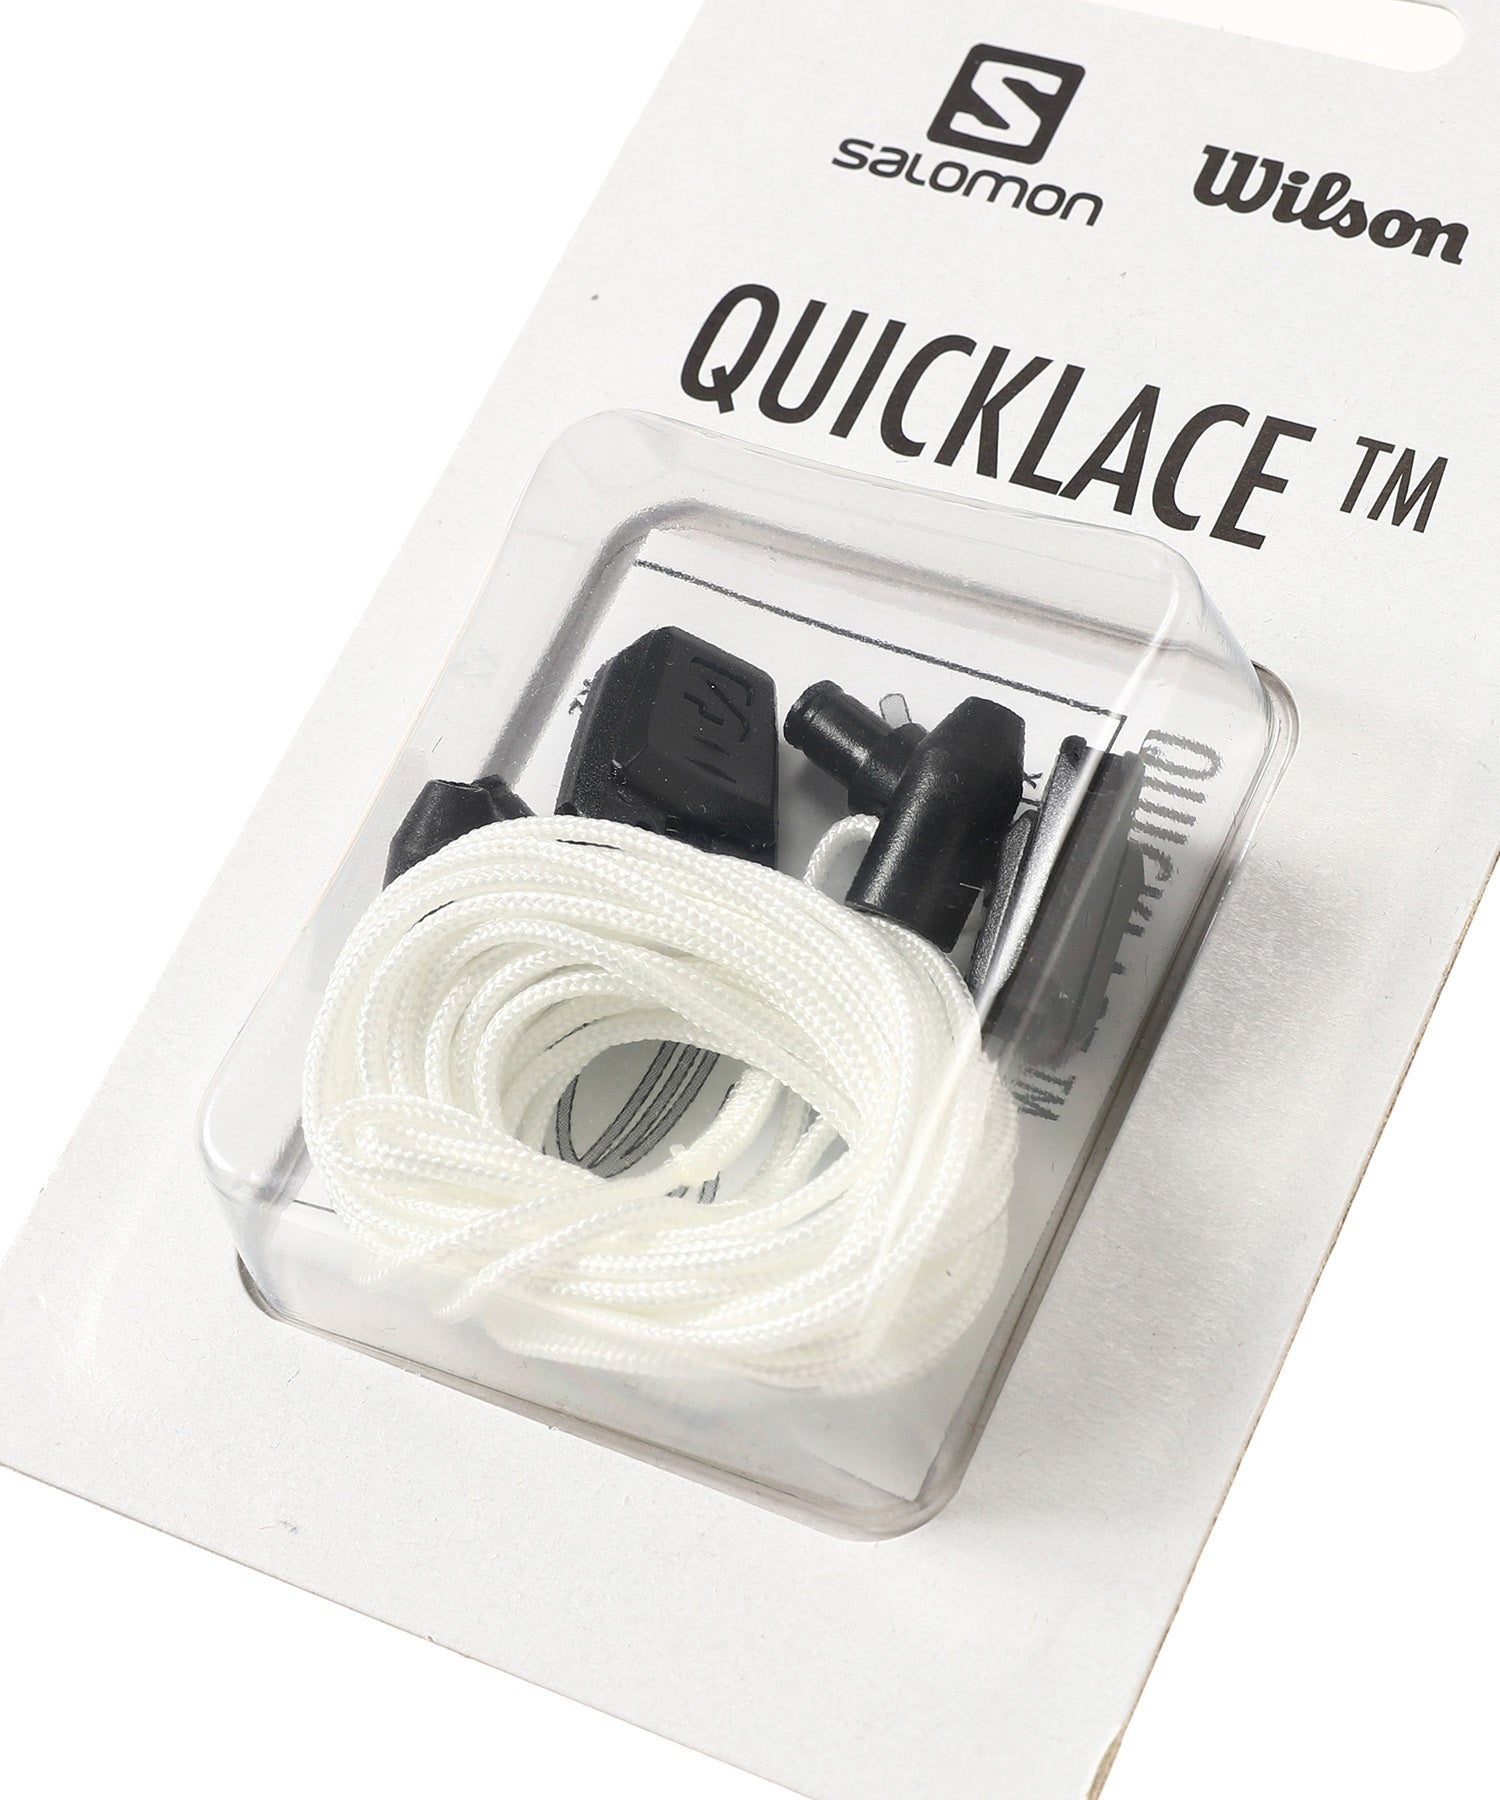 Quicklace Kit